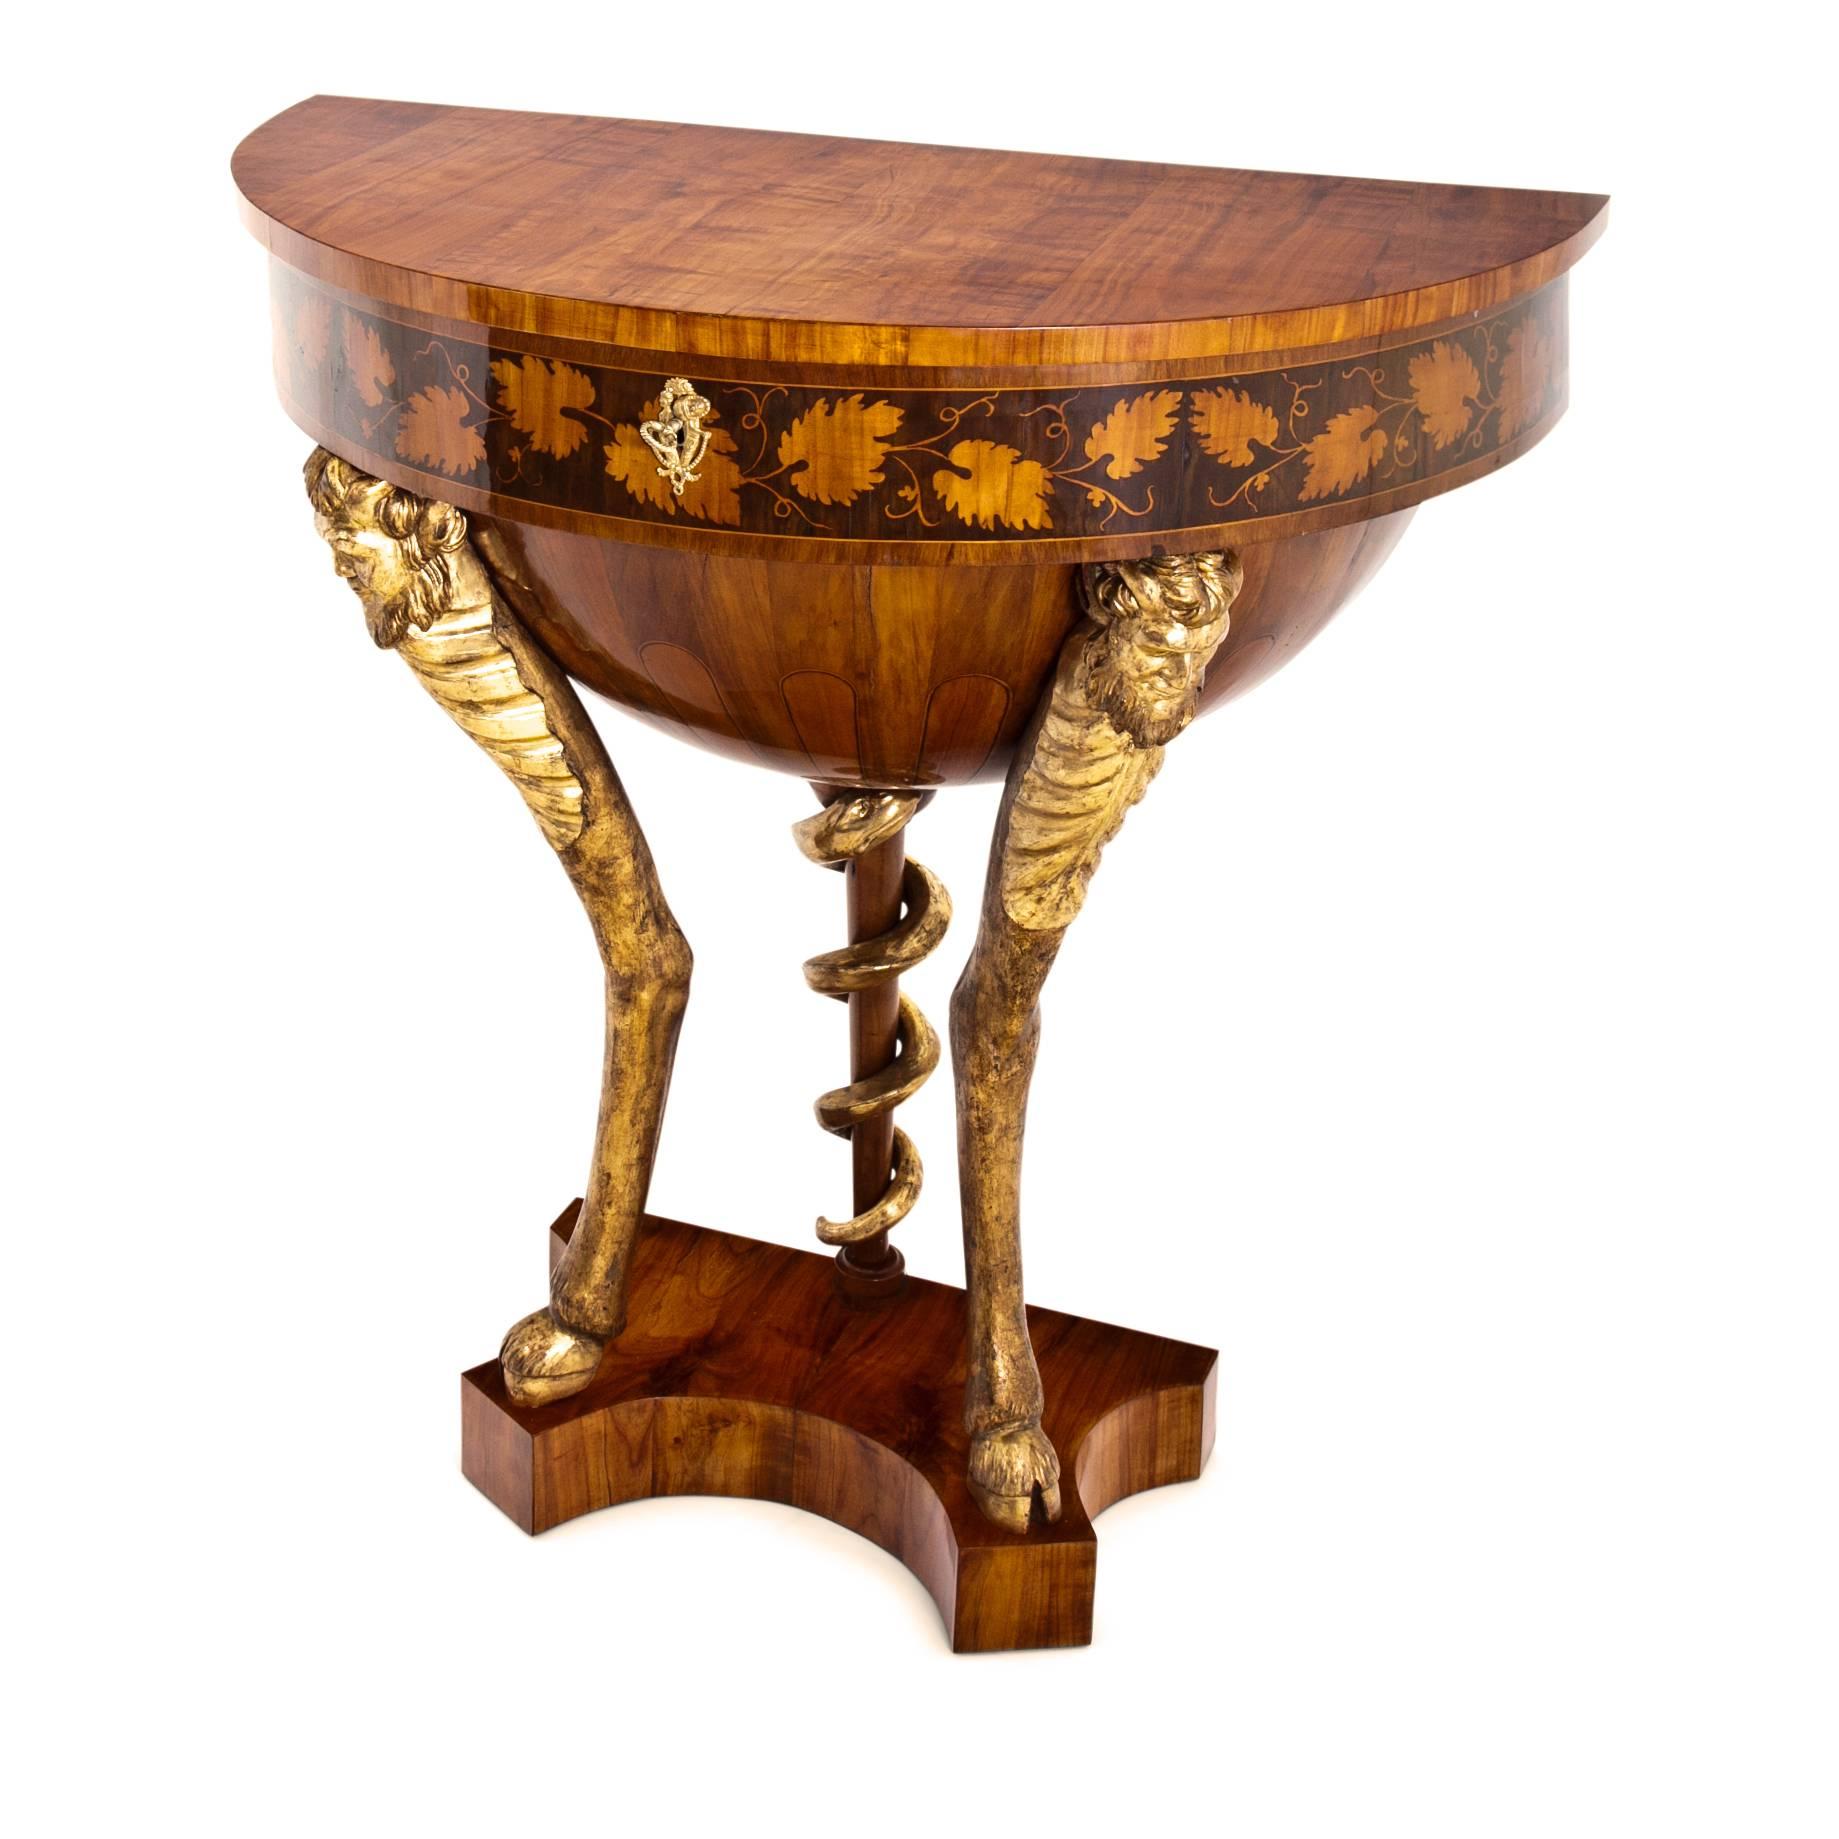 Empire console table on a trefoil base with legs in the shape of gilt satyrs with hove feet and one shaped like the rod of Asclepius with a gilt snake. The demilune body shows inlays in the shape vines at the front and holds one large compartment.